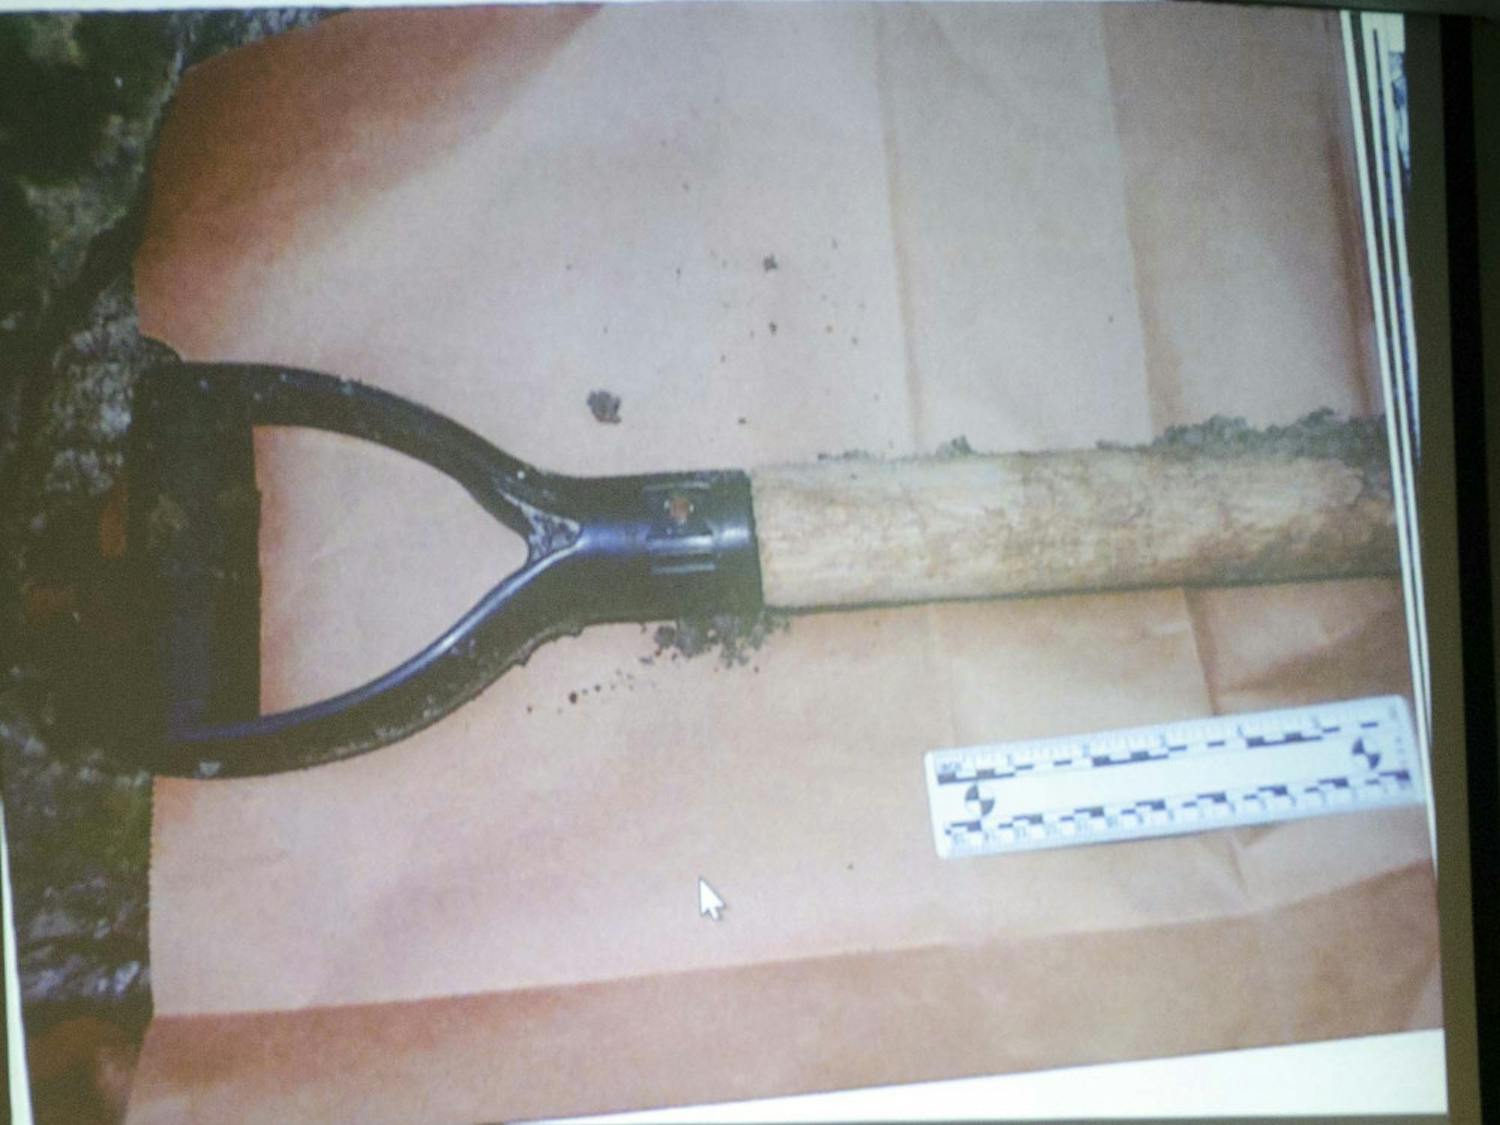 A close up of the shovel found under a boardwalk at Spyglass Apartments, right around the corner from Pedro Bravo’s apartment.